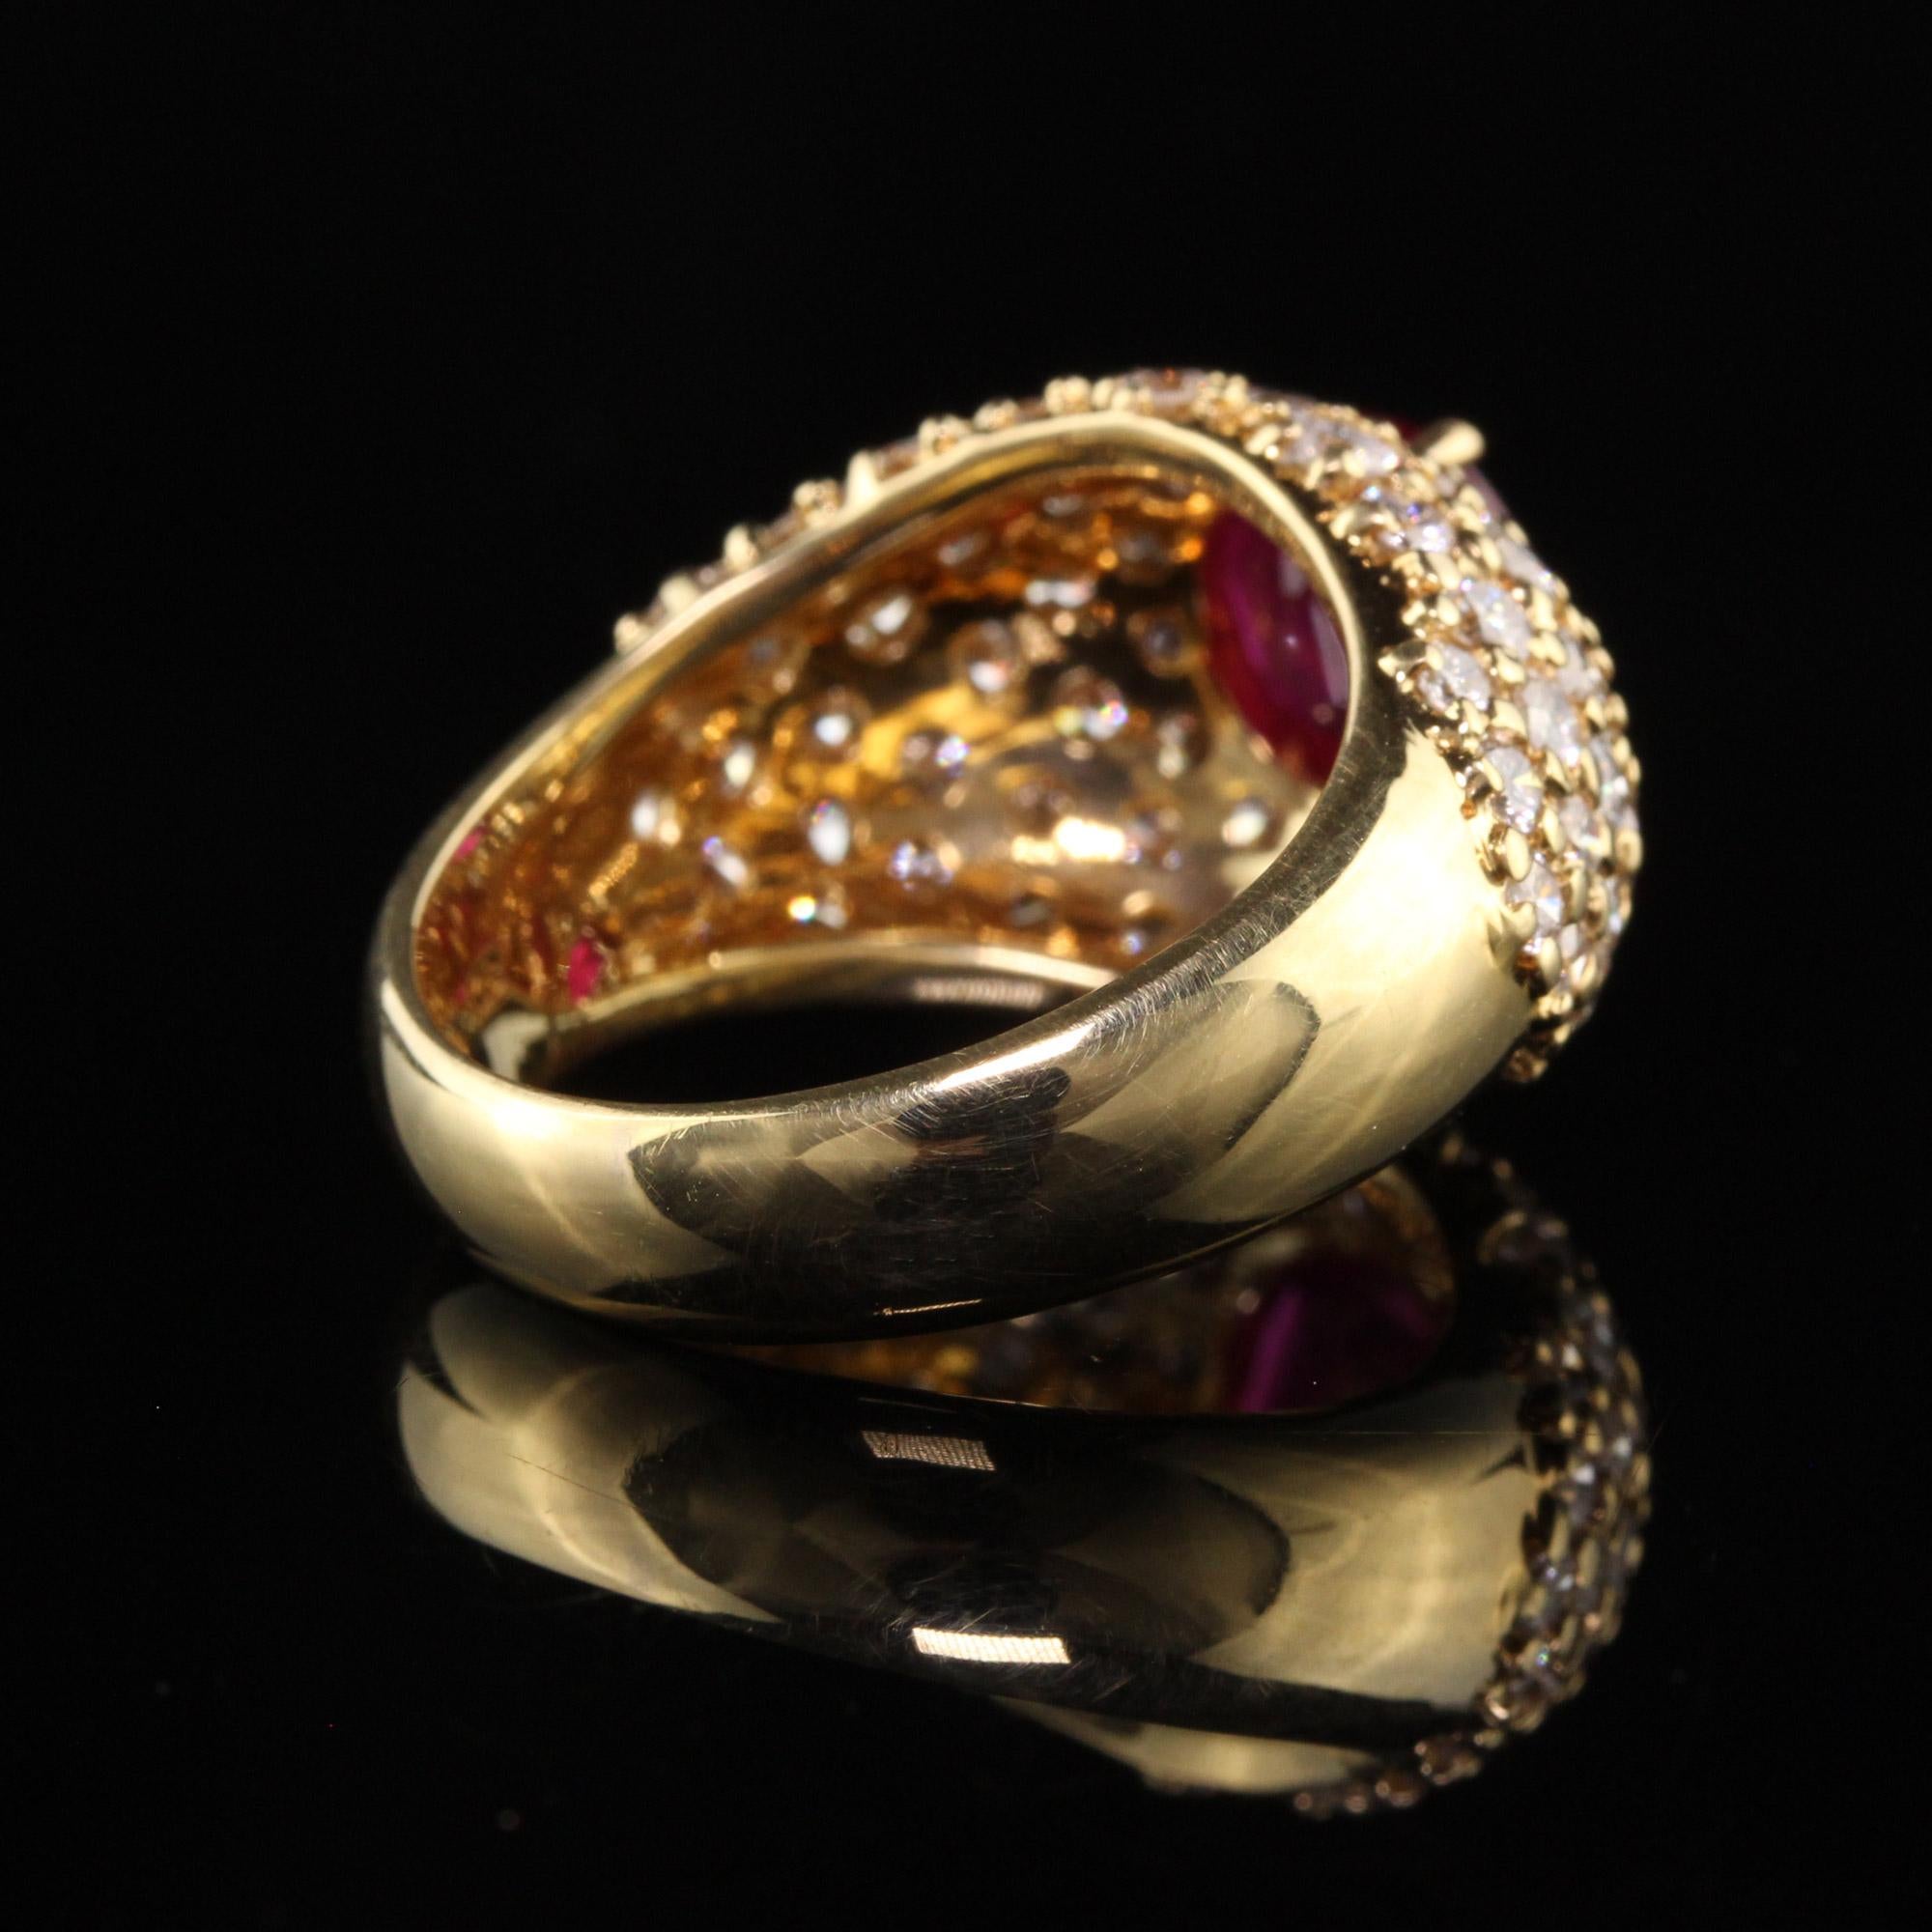 Vintage Estate 18K Yellow Gold Burma Ruby and Diamond Ring - GIA In Good Condition For Sale In Great Neck, NY